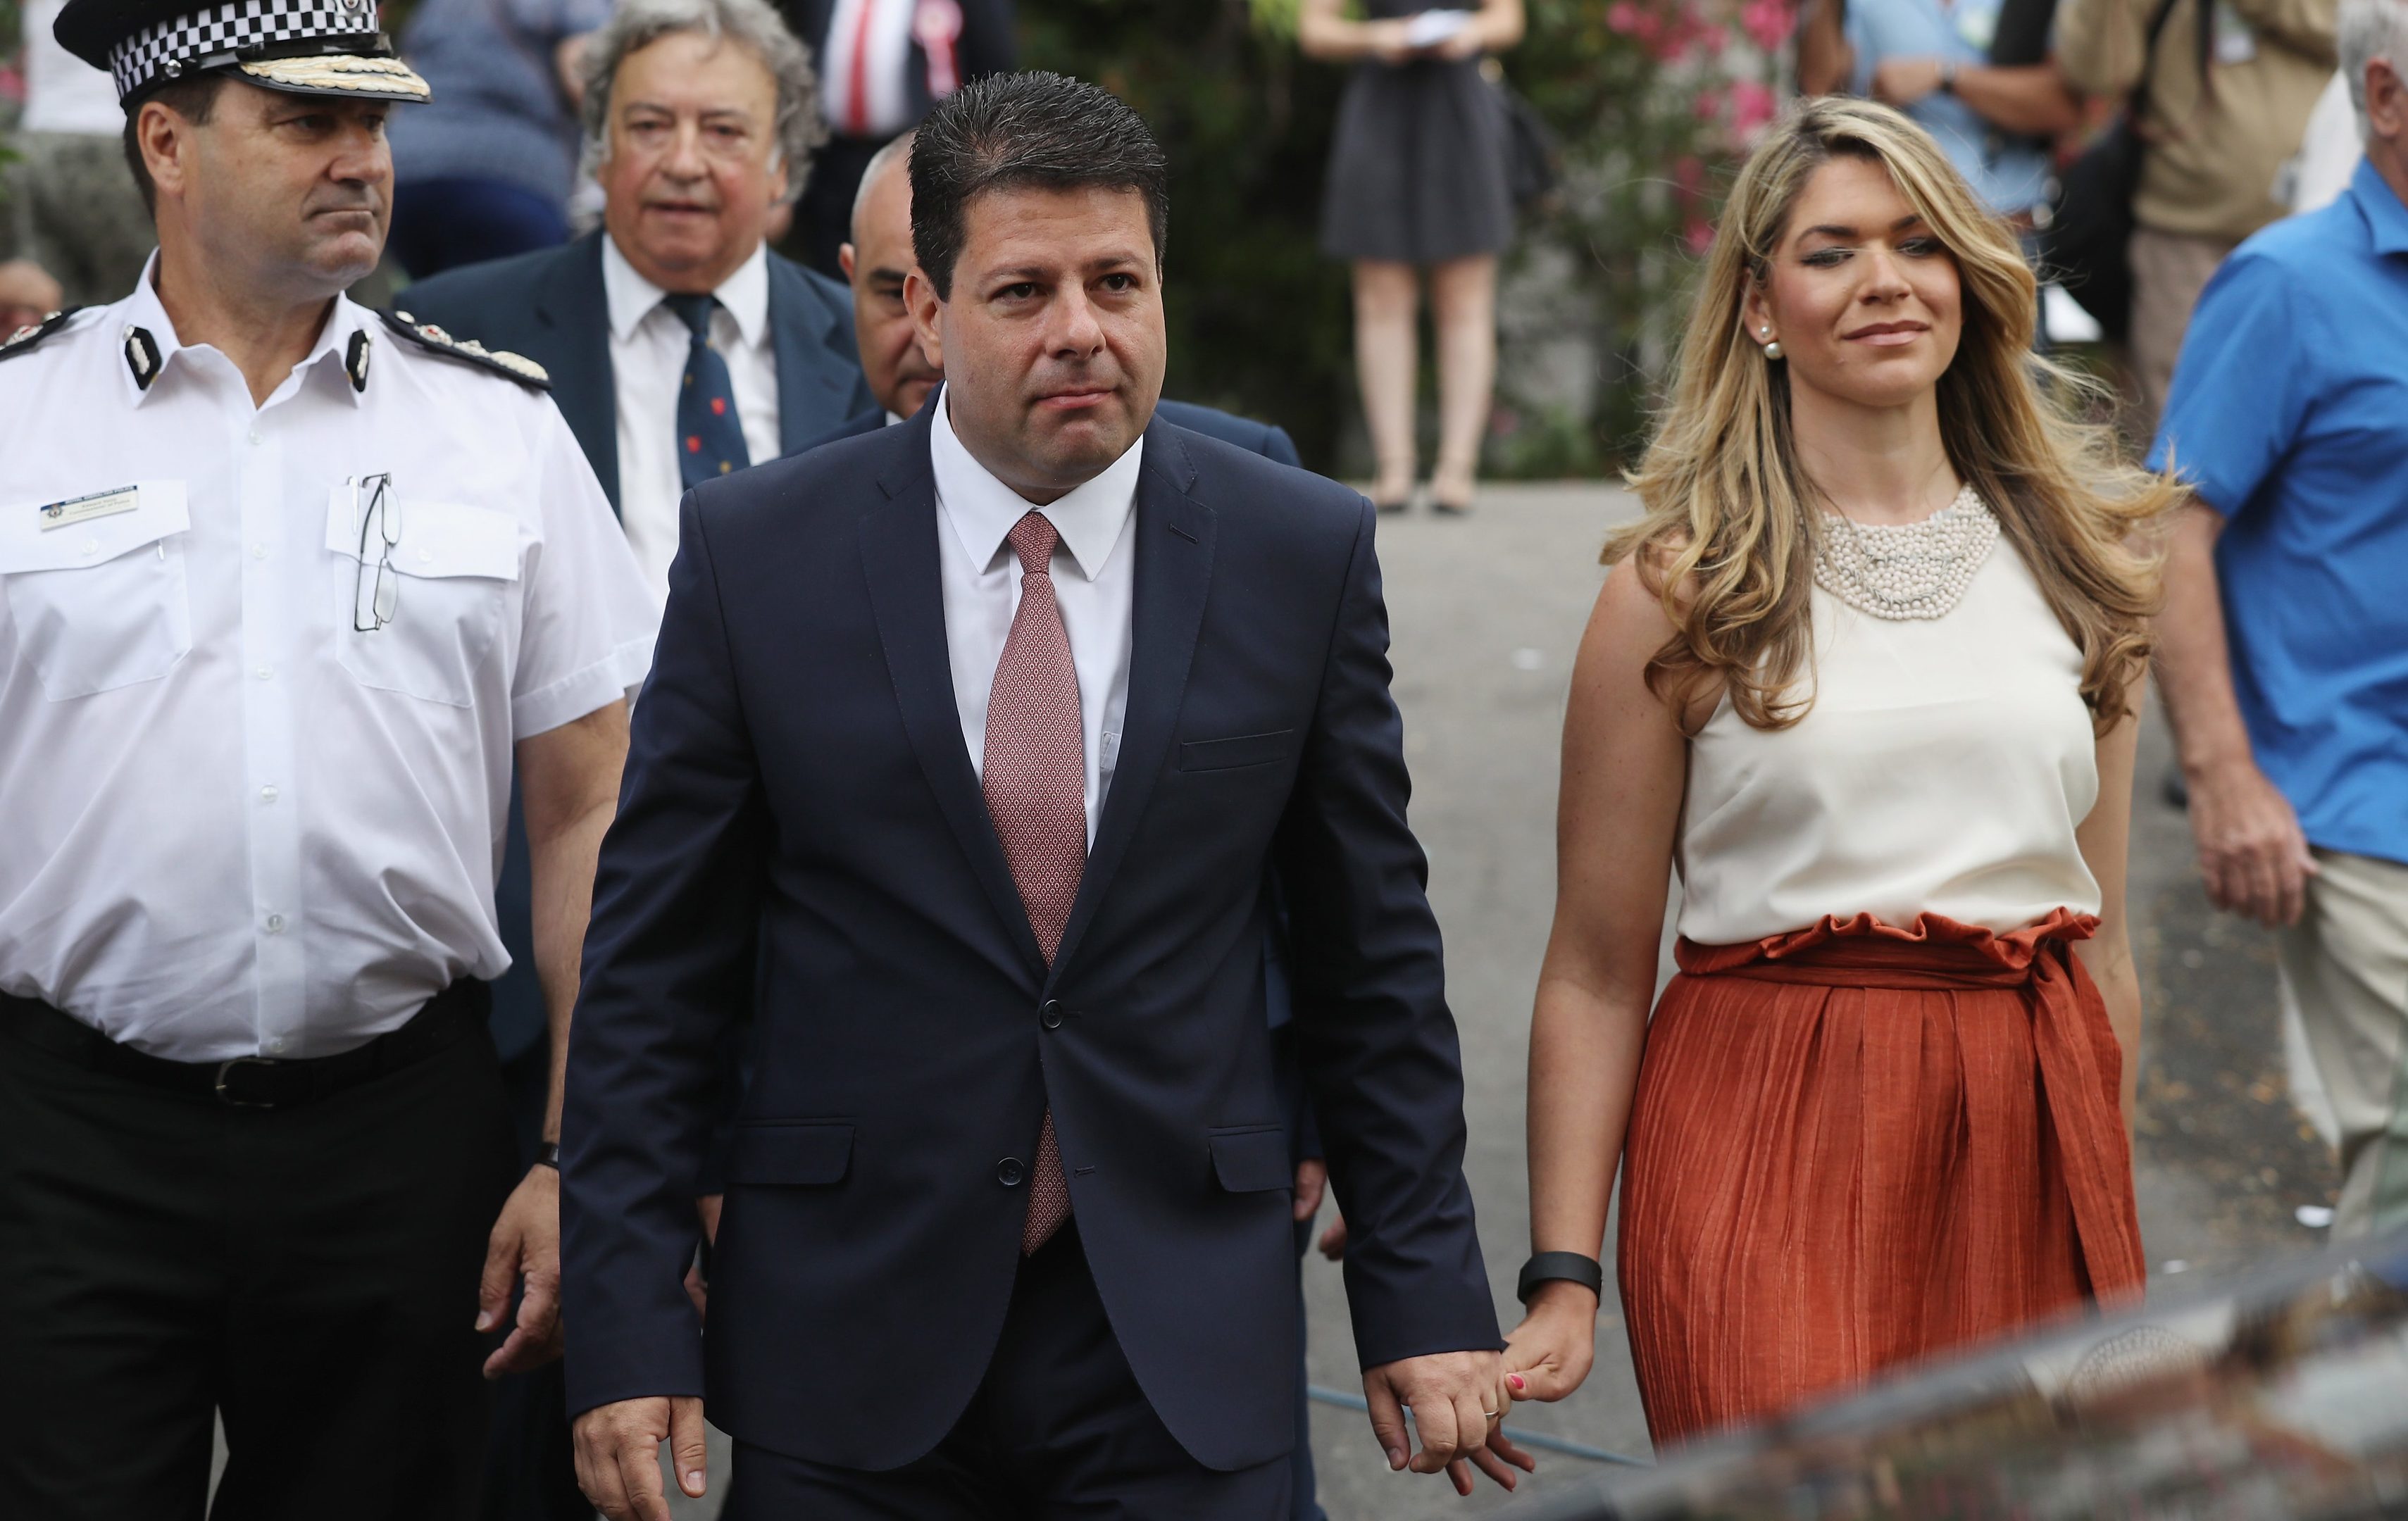 Gibraltar Chief Minister Fabian Picardo and his wife Justine.